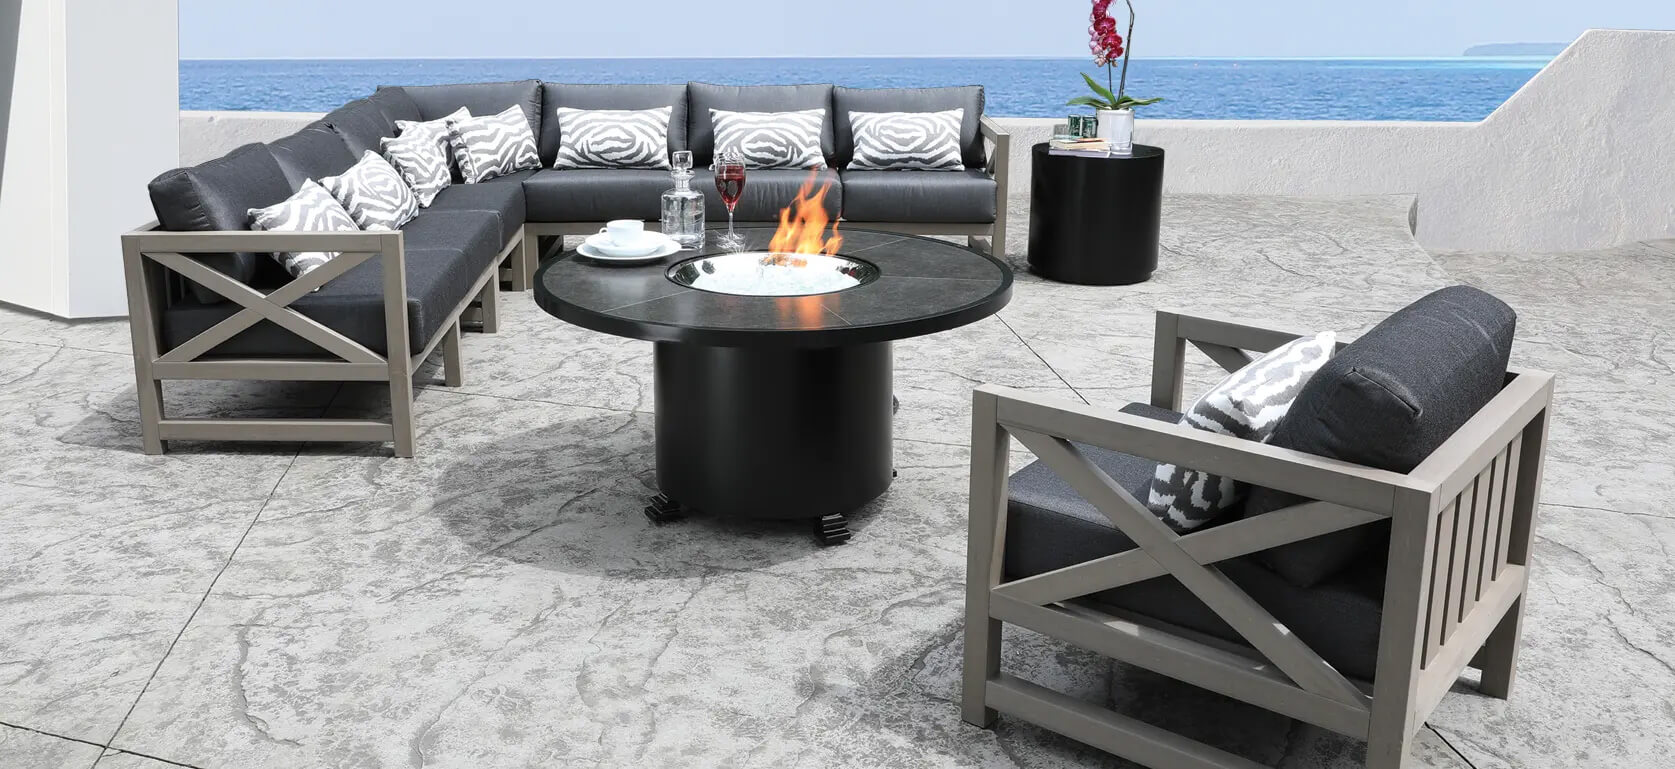 Cabana Coast - Kensington Collection With Fire Pit